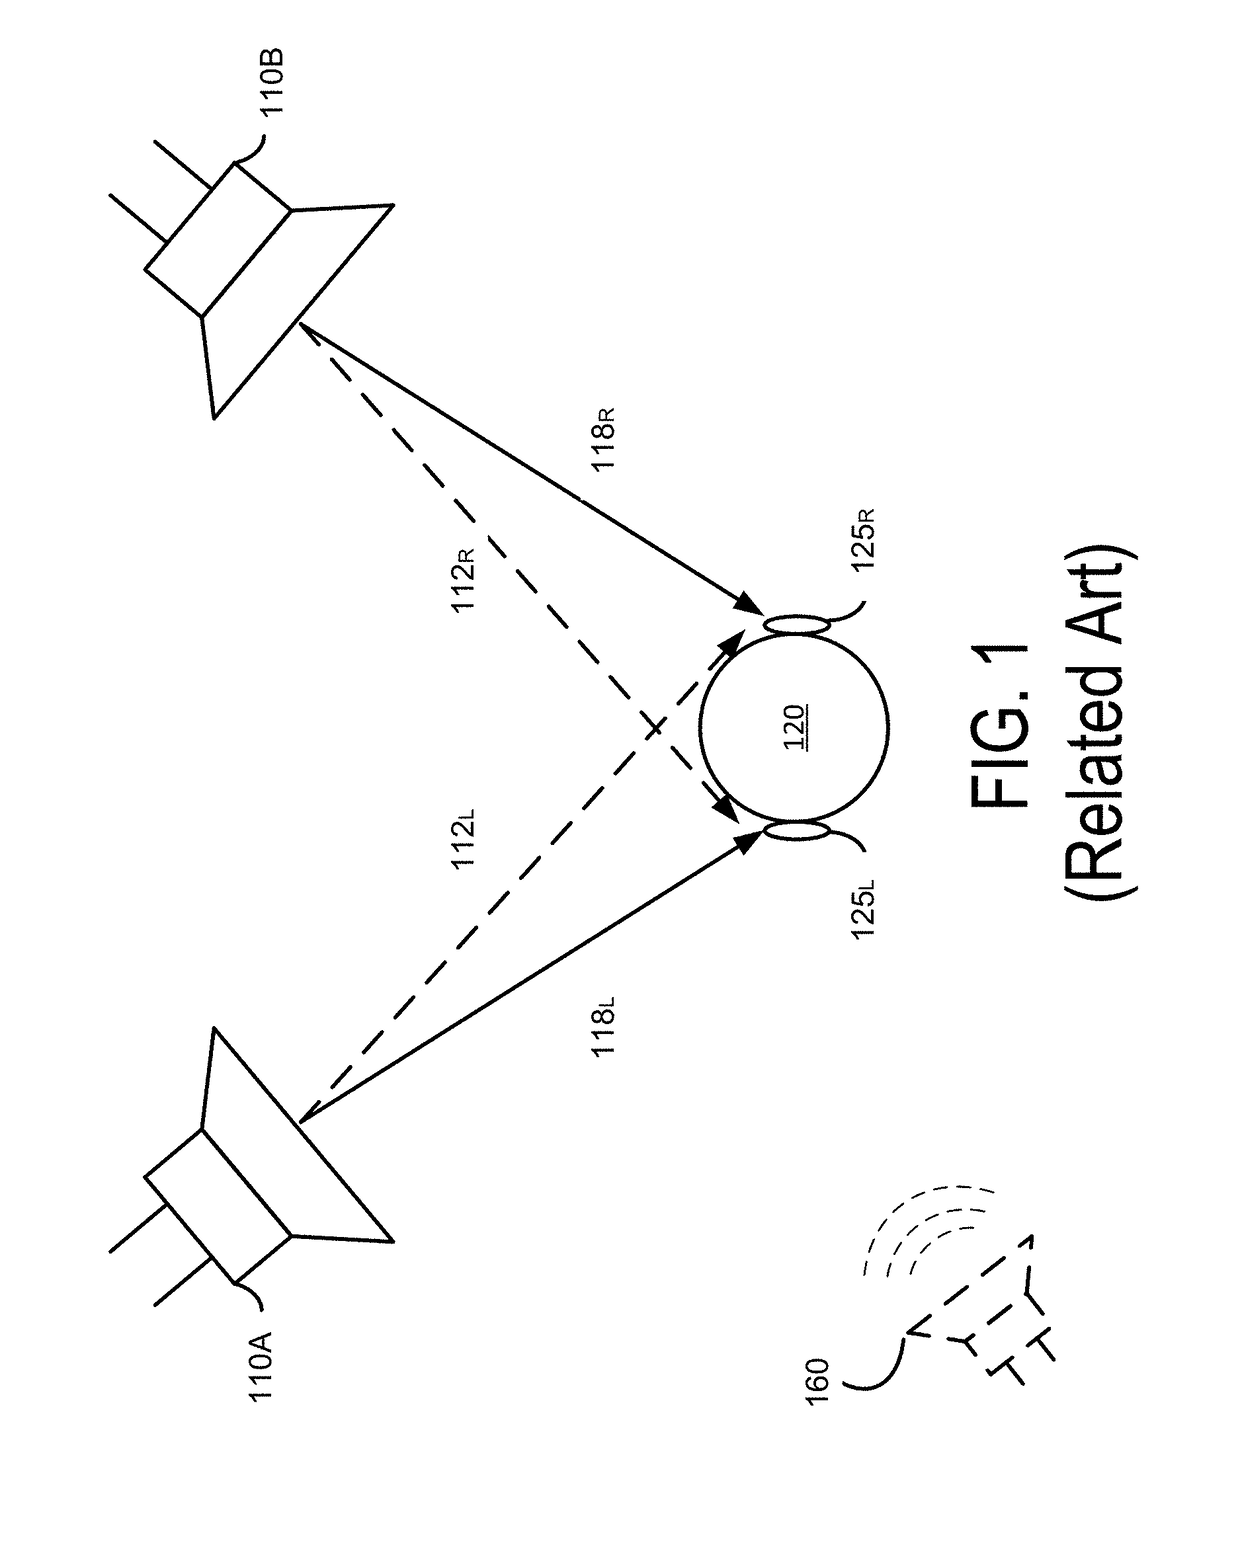 Subband spatial and crosstalk cancellation for audio reproduction